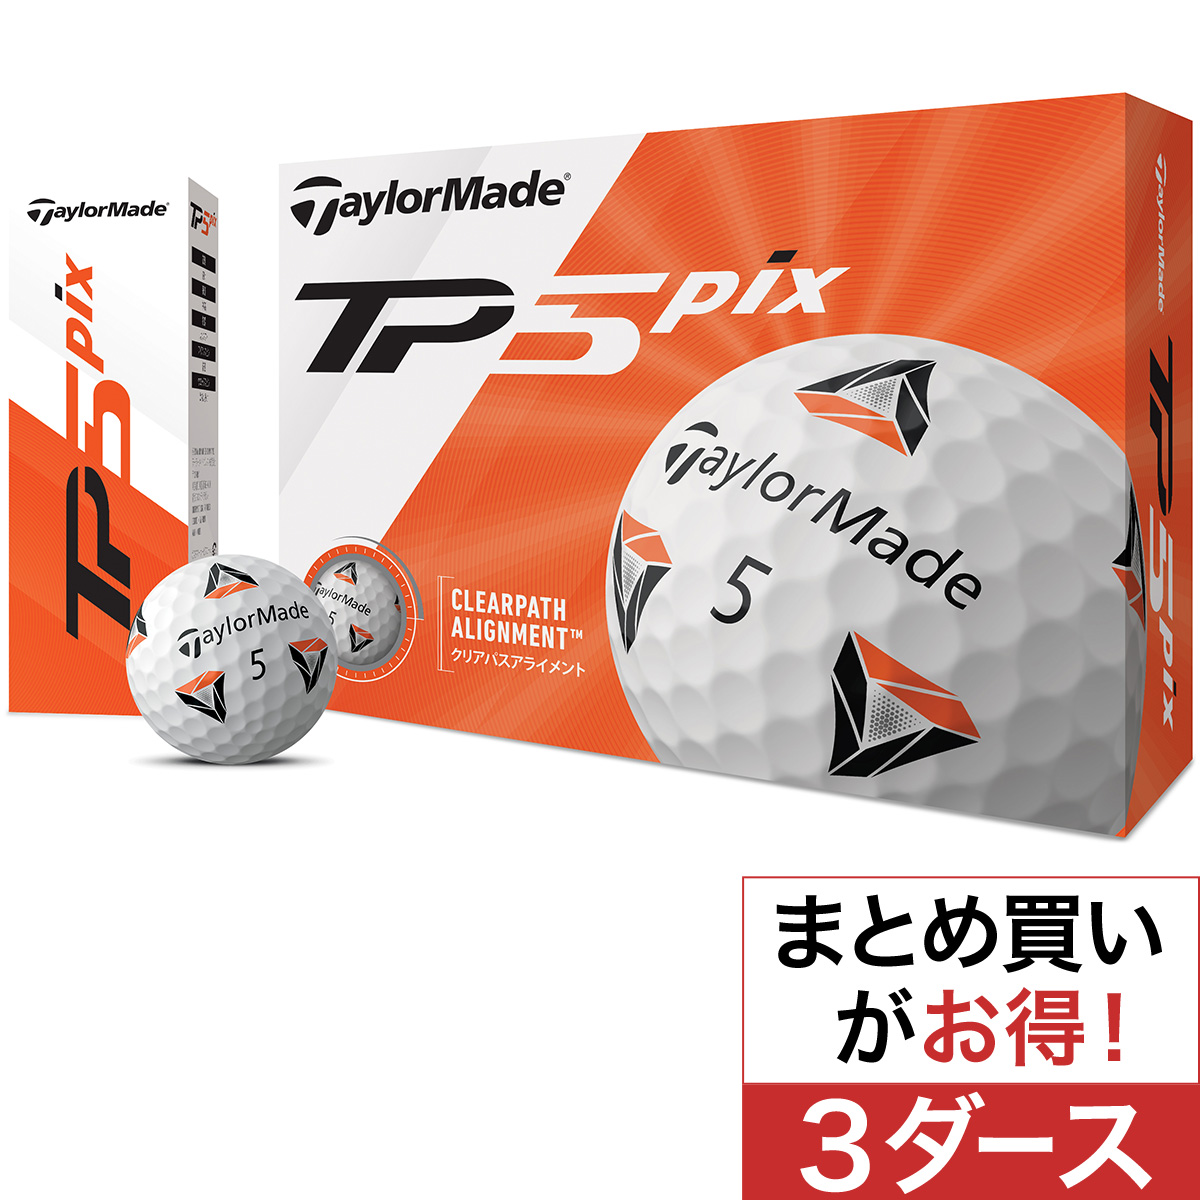  TP5 pix ボール 3ダースセット 